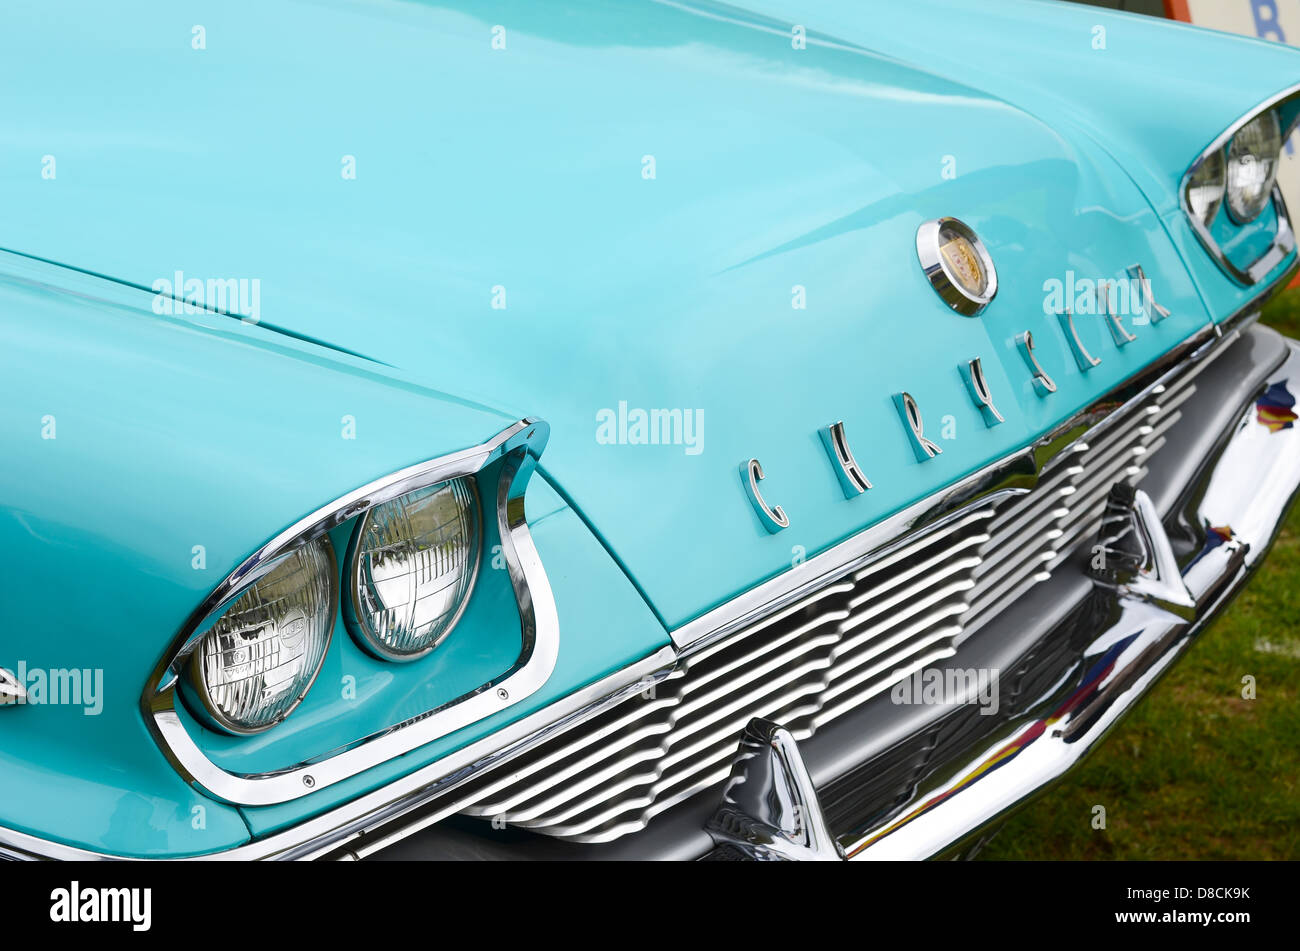 The Chrysler 'New Yorker' classic car. Stock Photo